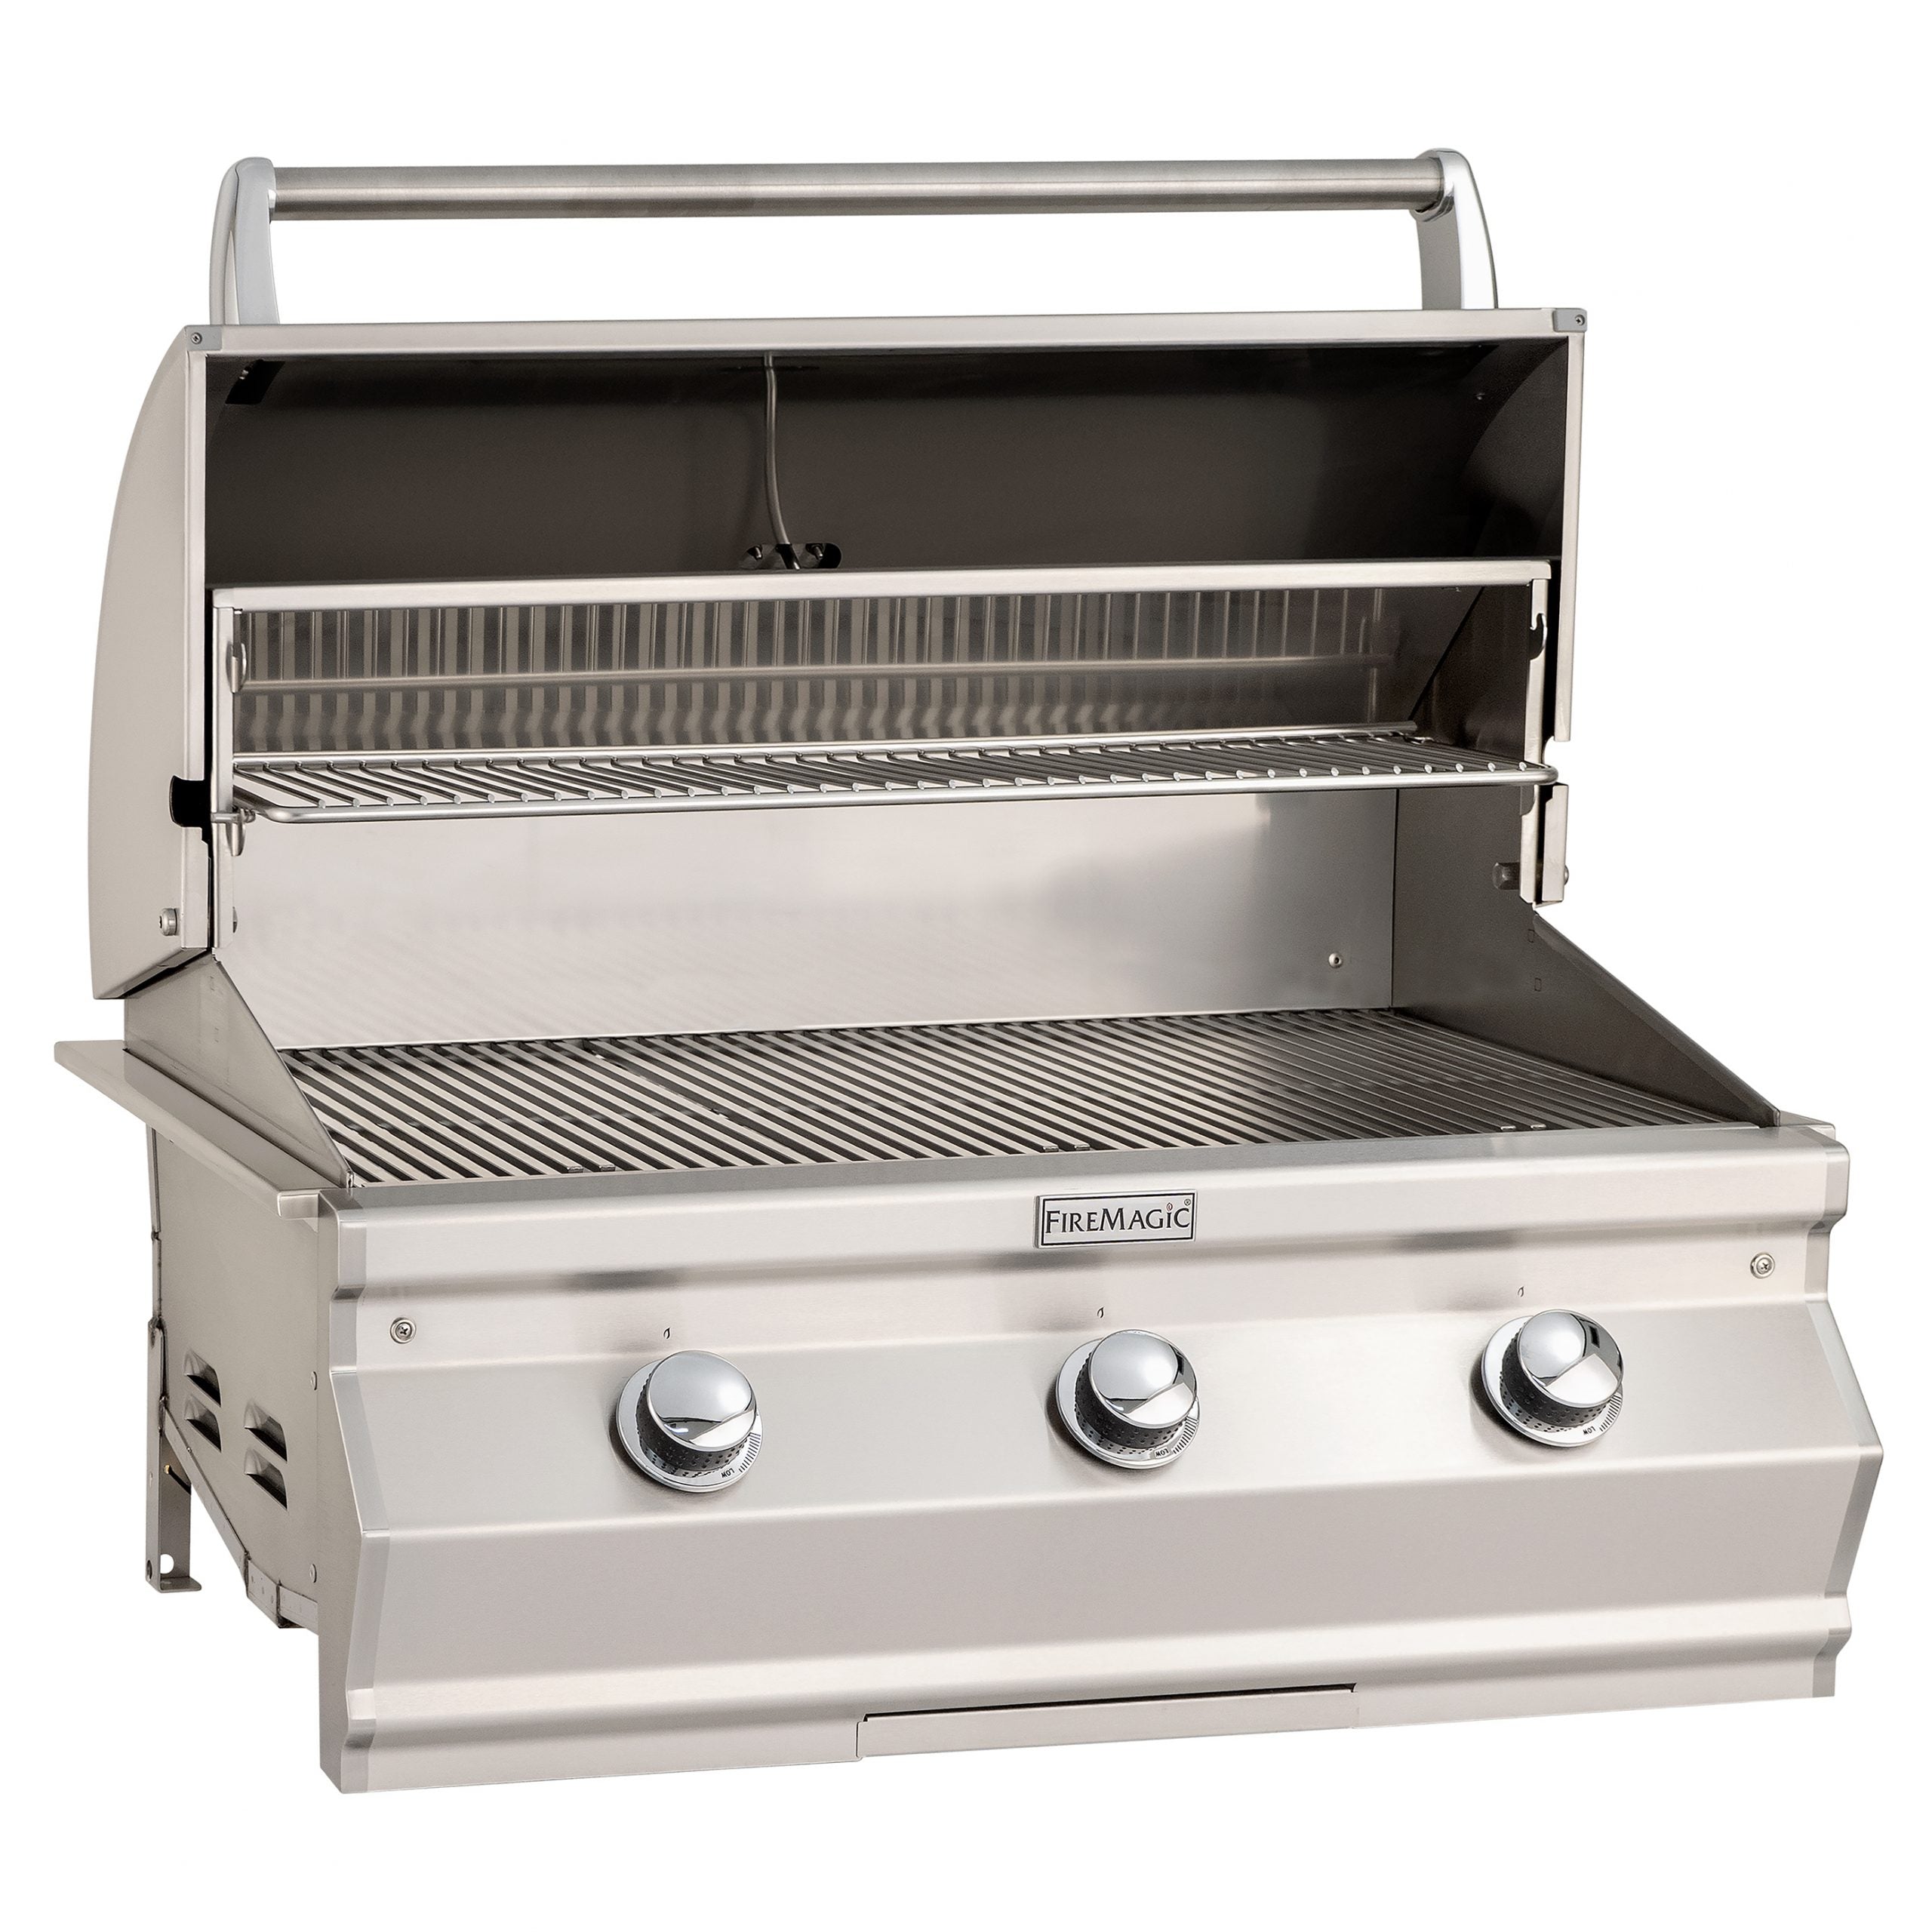 Fire Magic Choice C540i Built-In Grill with Analog Thermometer